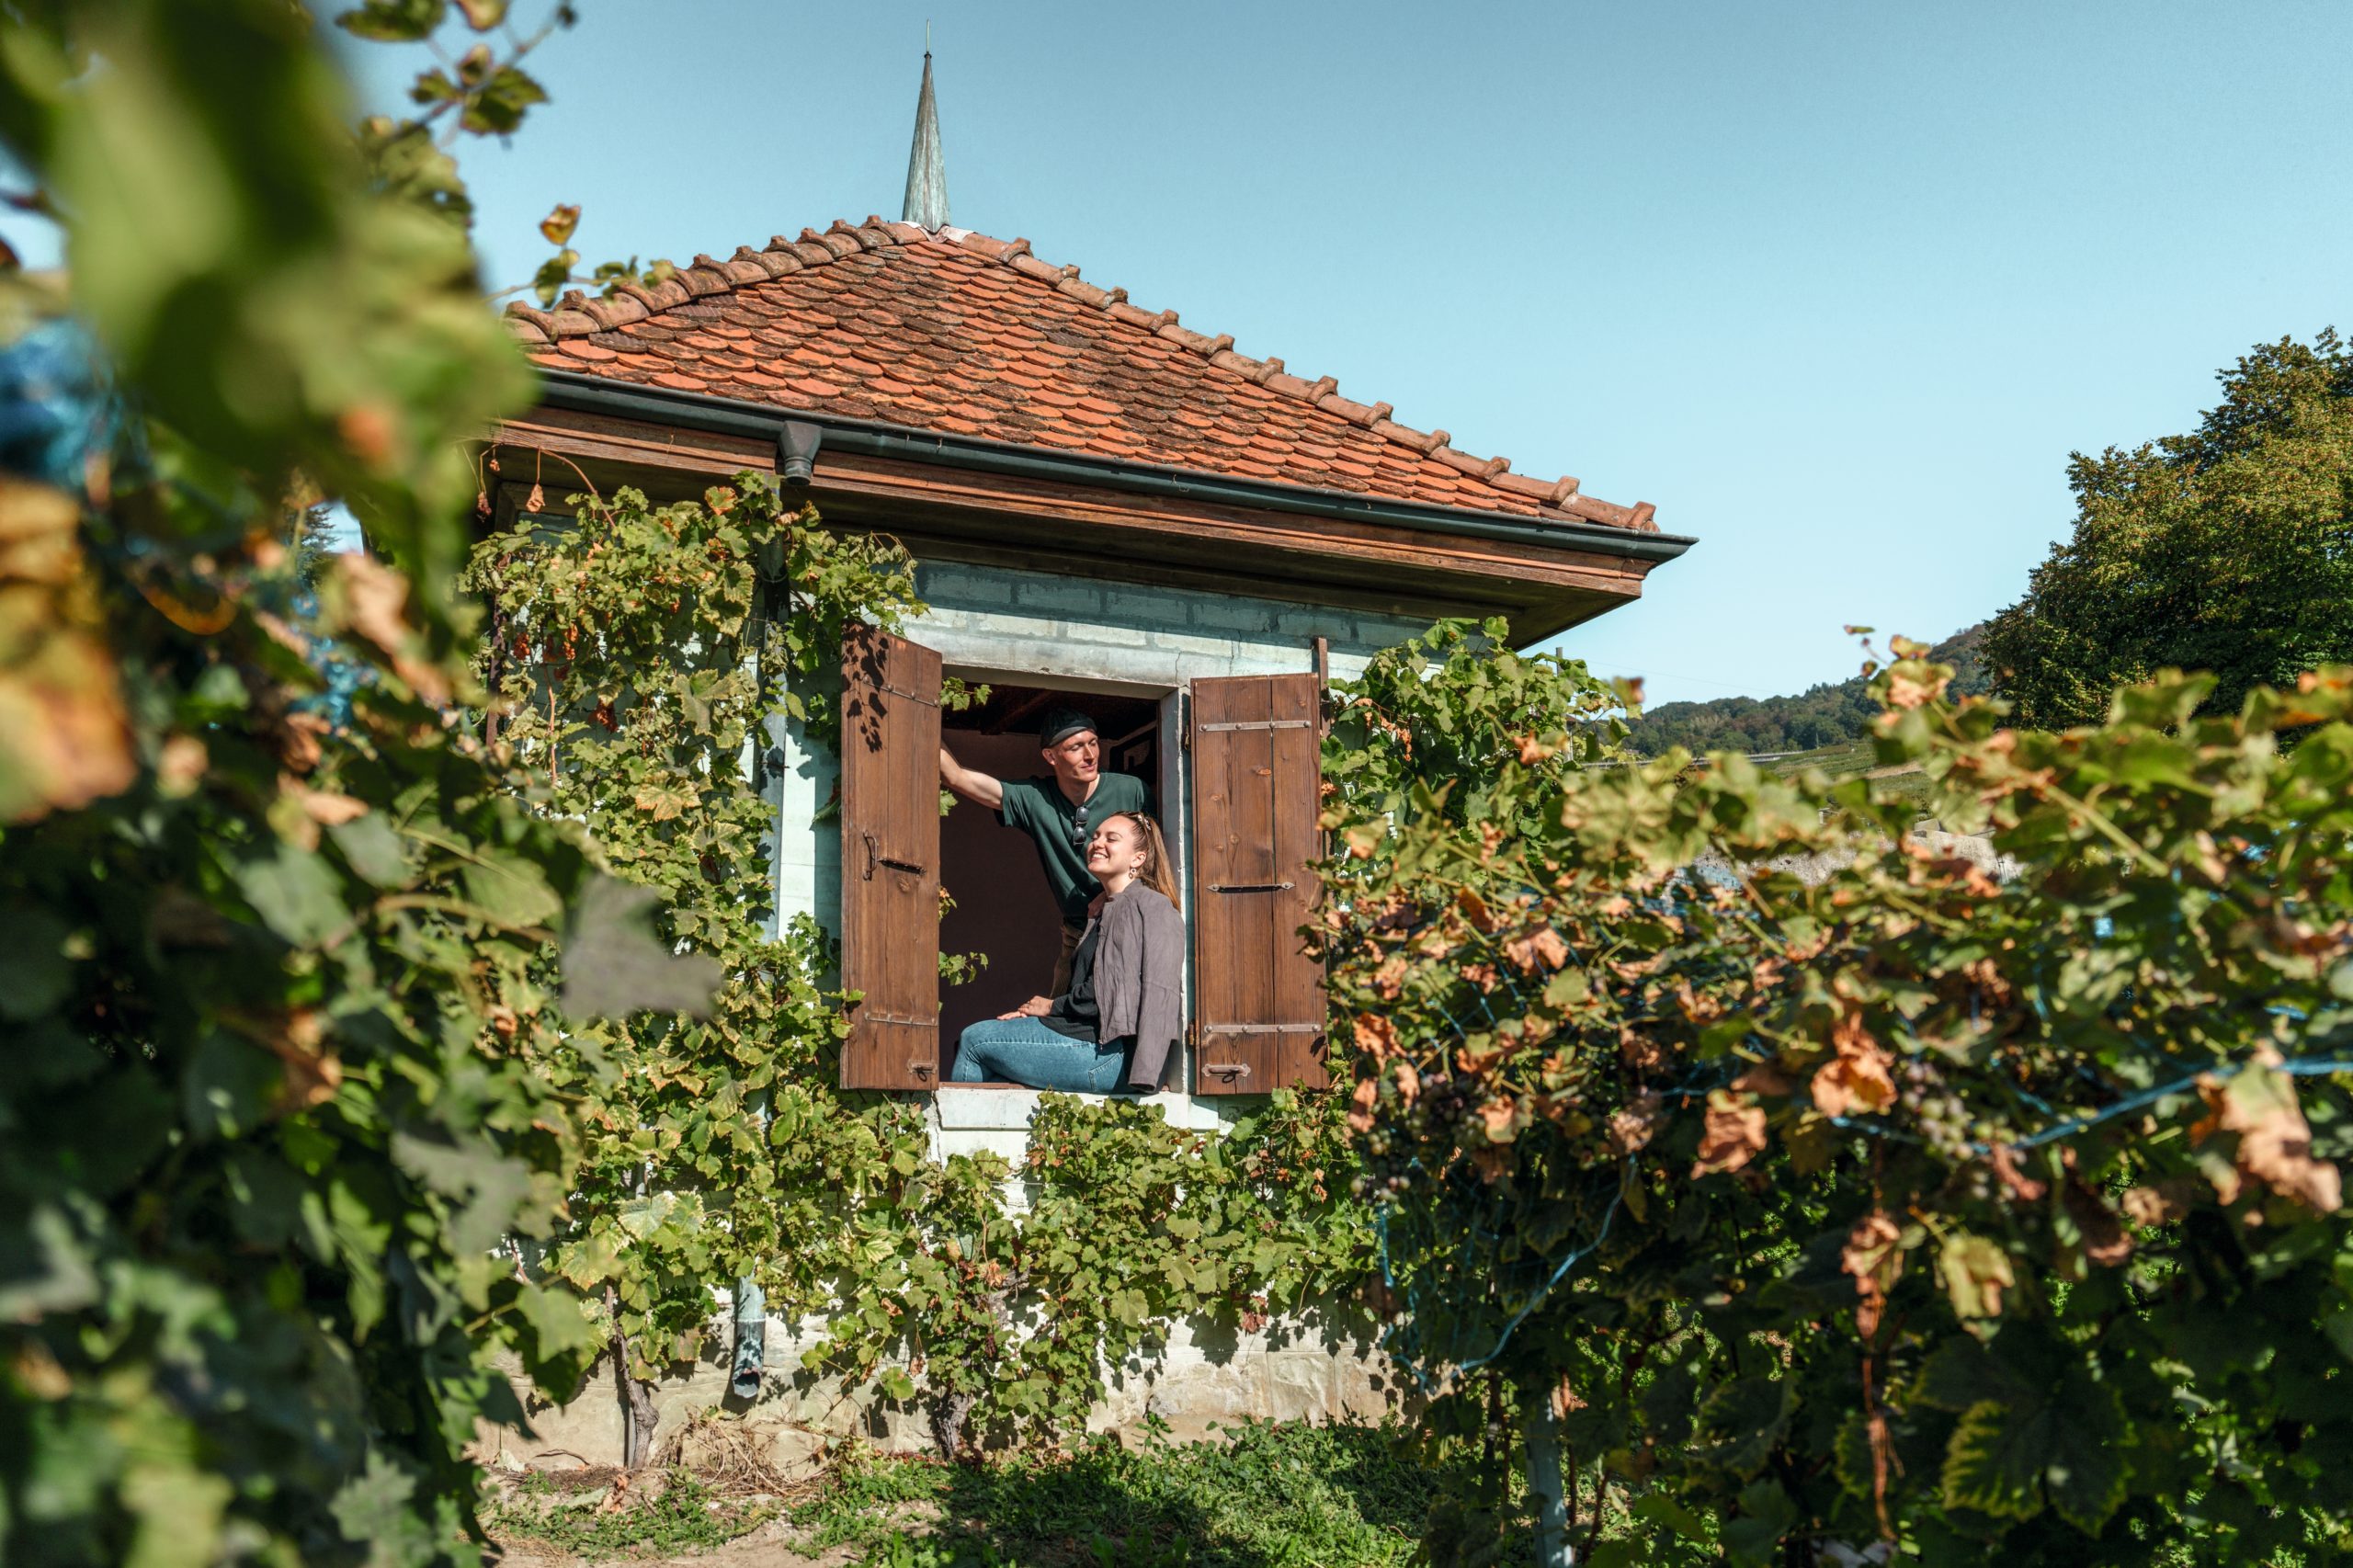 Where to spend a romantic weekend among the vines